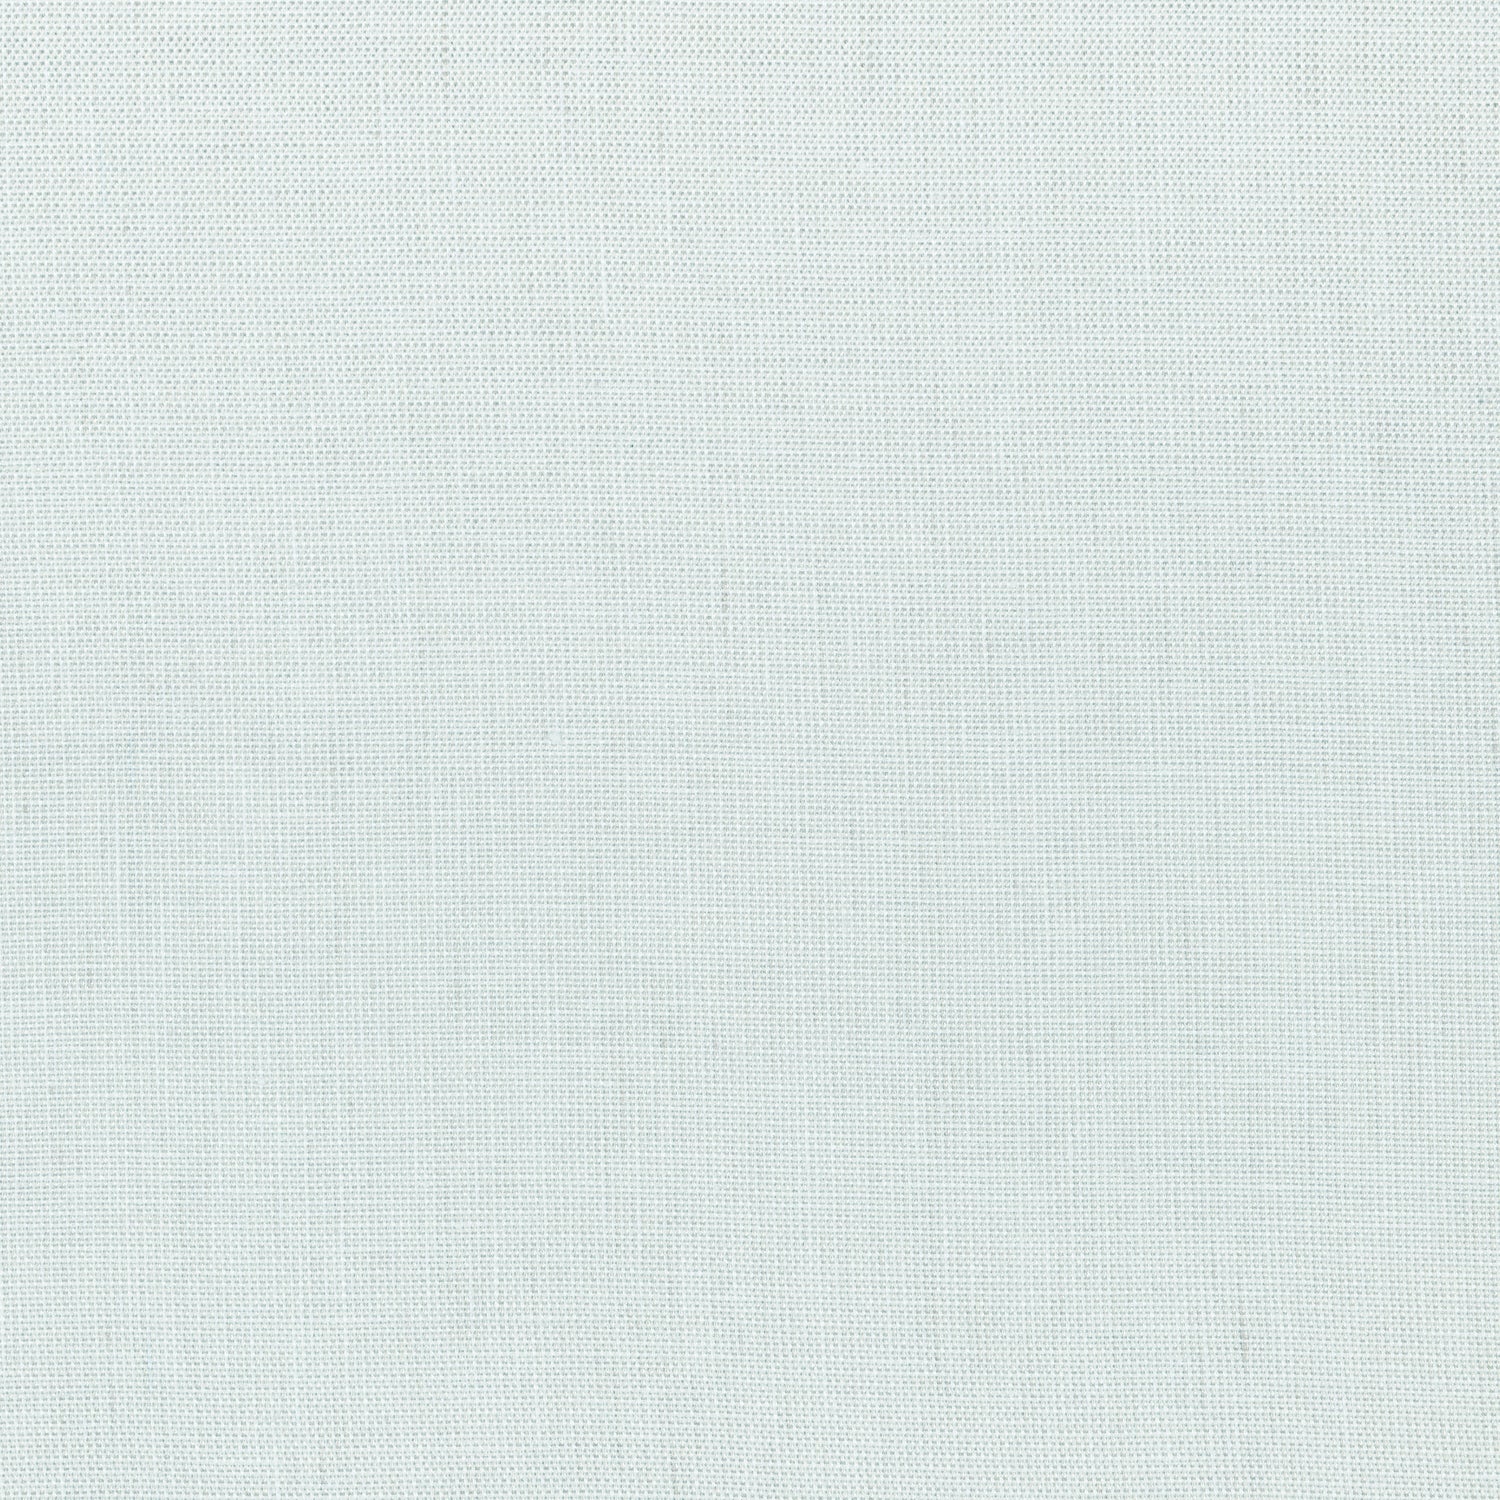 Skye Linen fabric in mist color - pattern number FWW7618 - by Thibaut in the Palisades collection